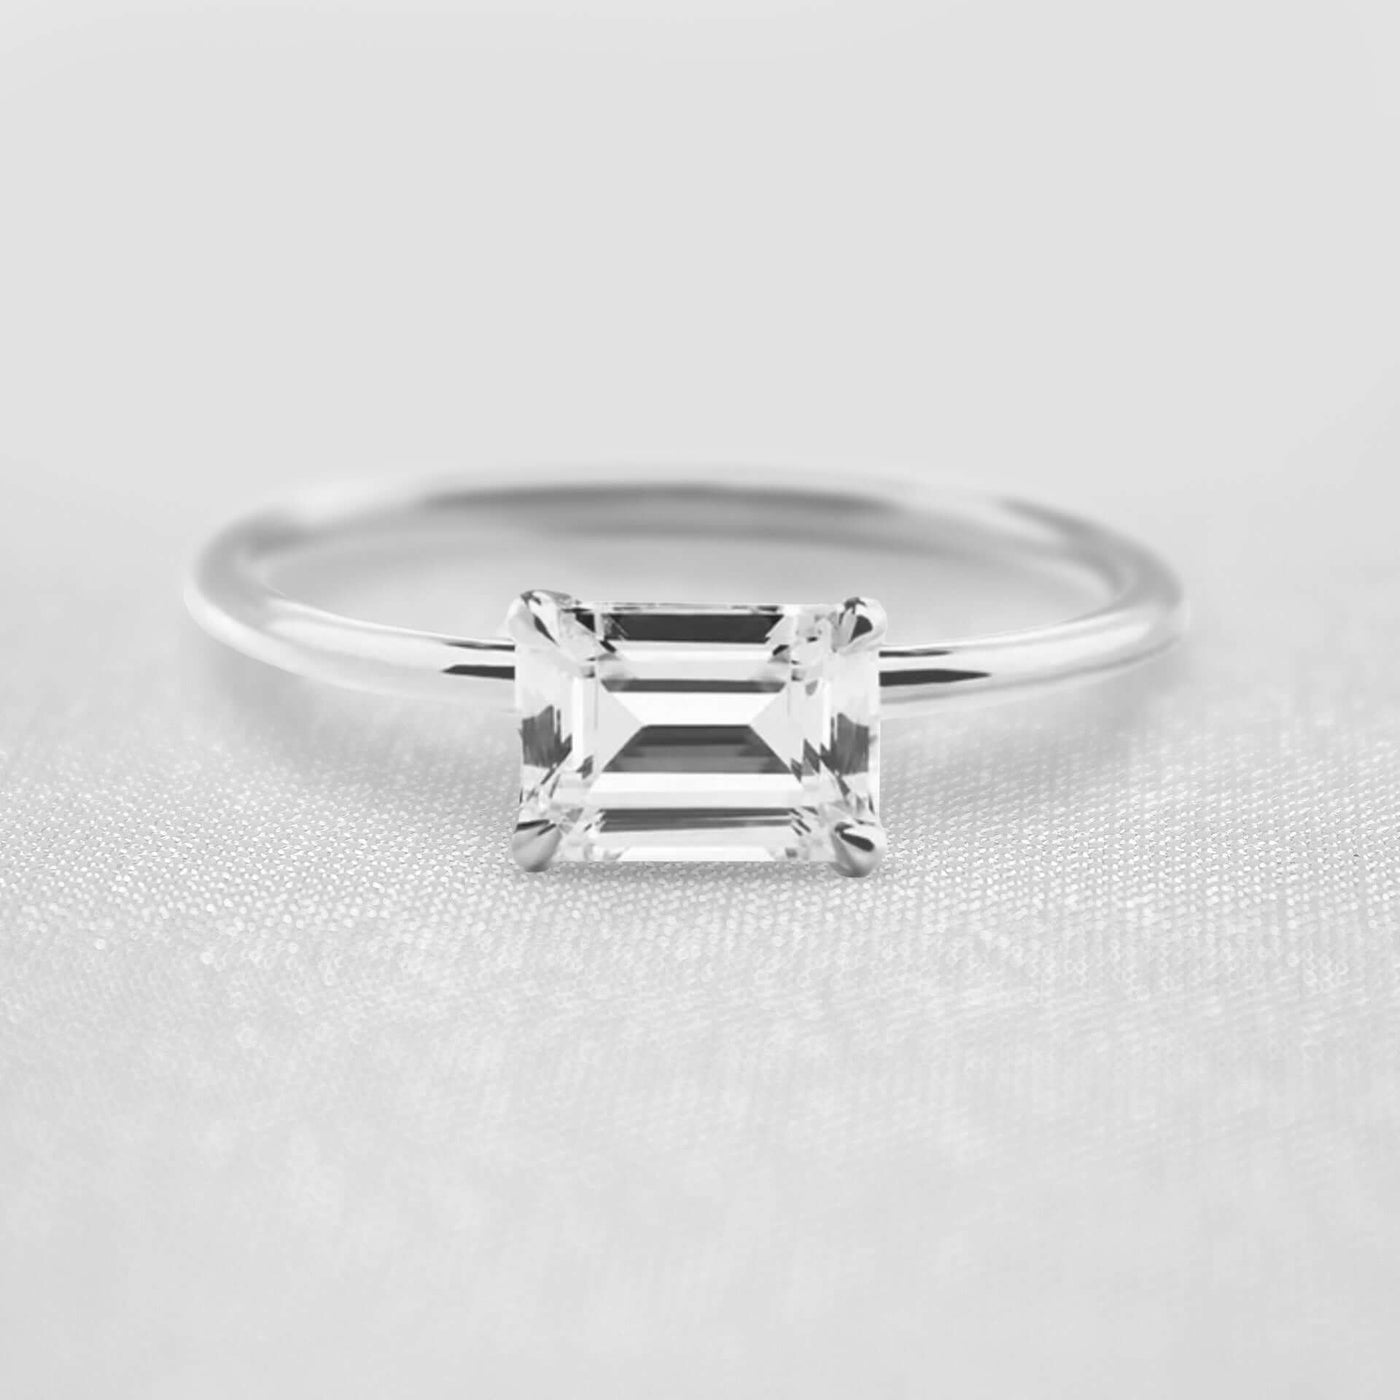 Shown in 1.0 Carat * The Mia East West Emerald Cut Moissanite Solitaire Engagement Ring | Lisa Robin#shape_emerald